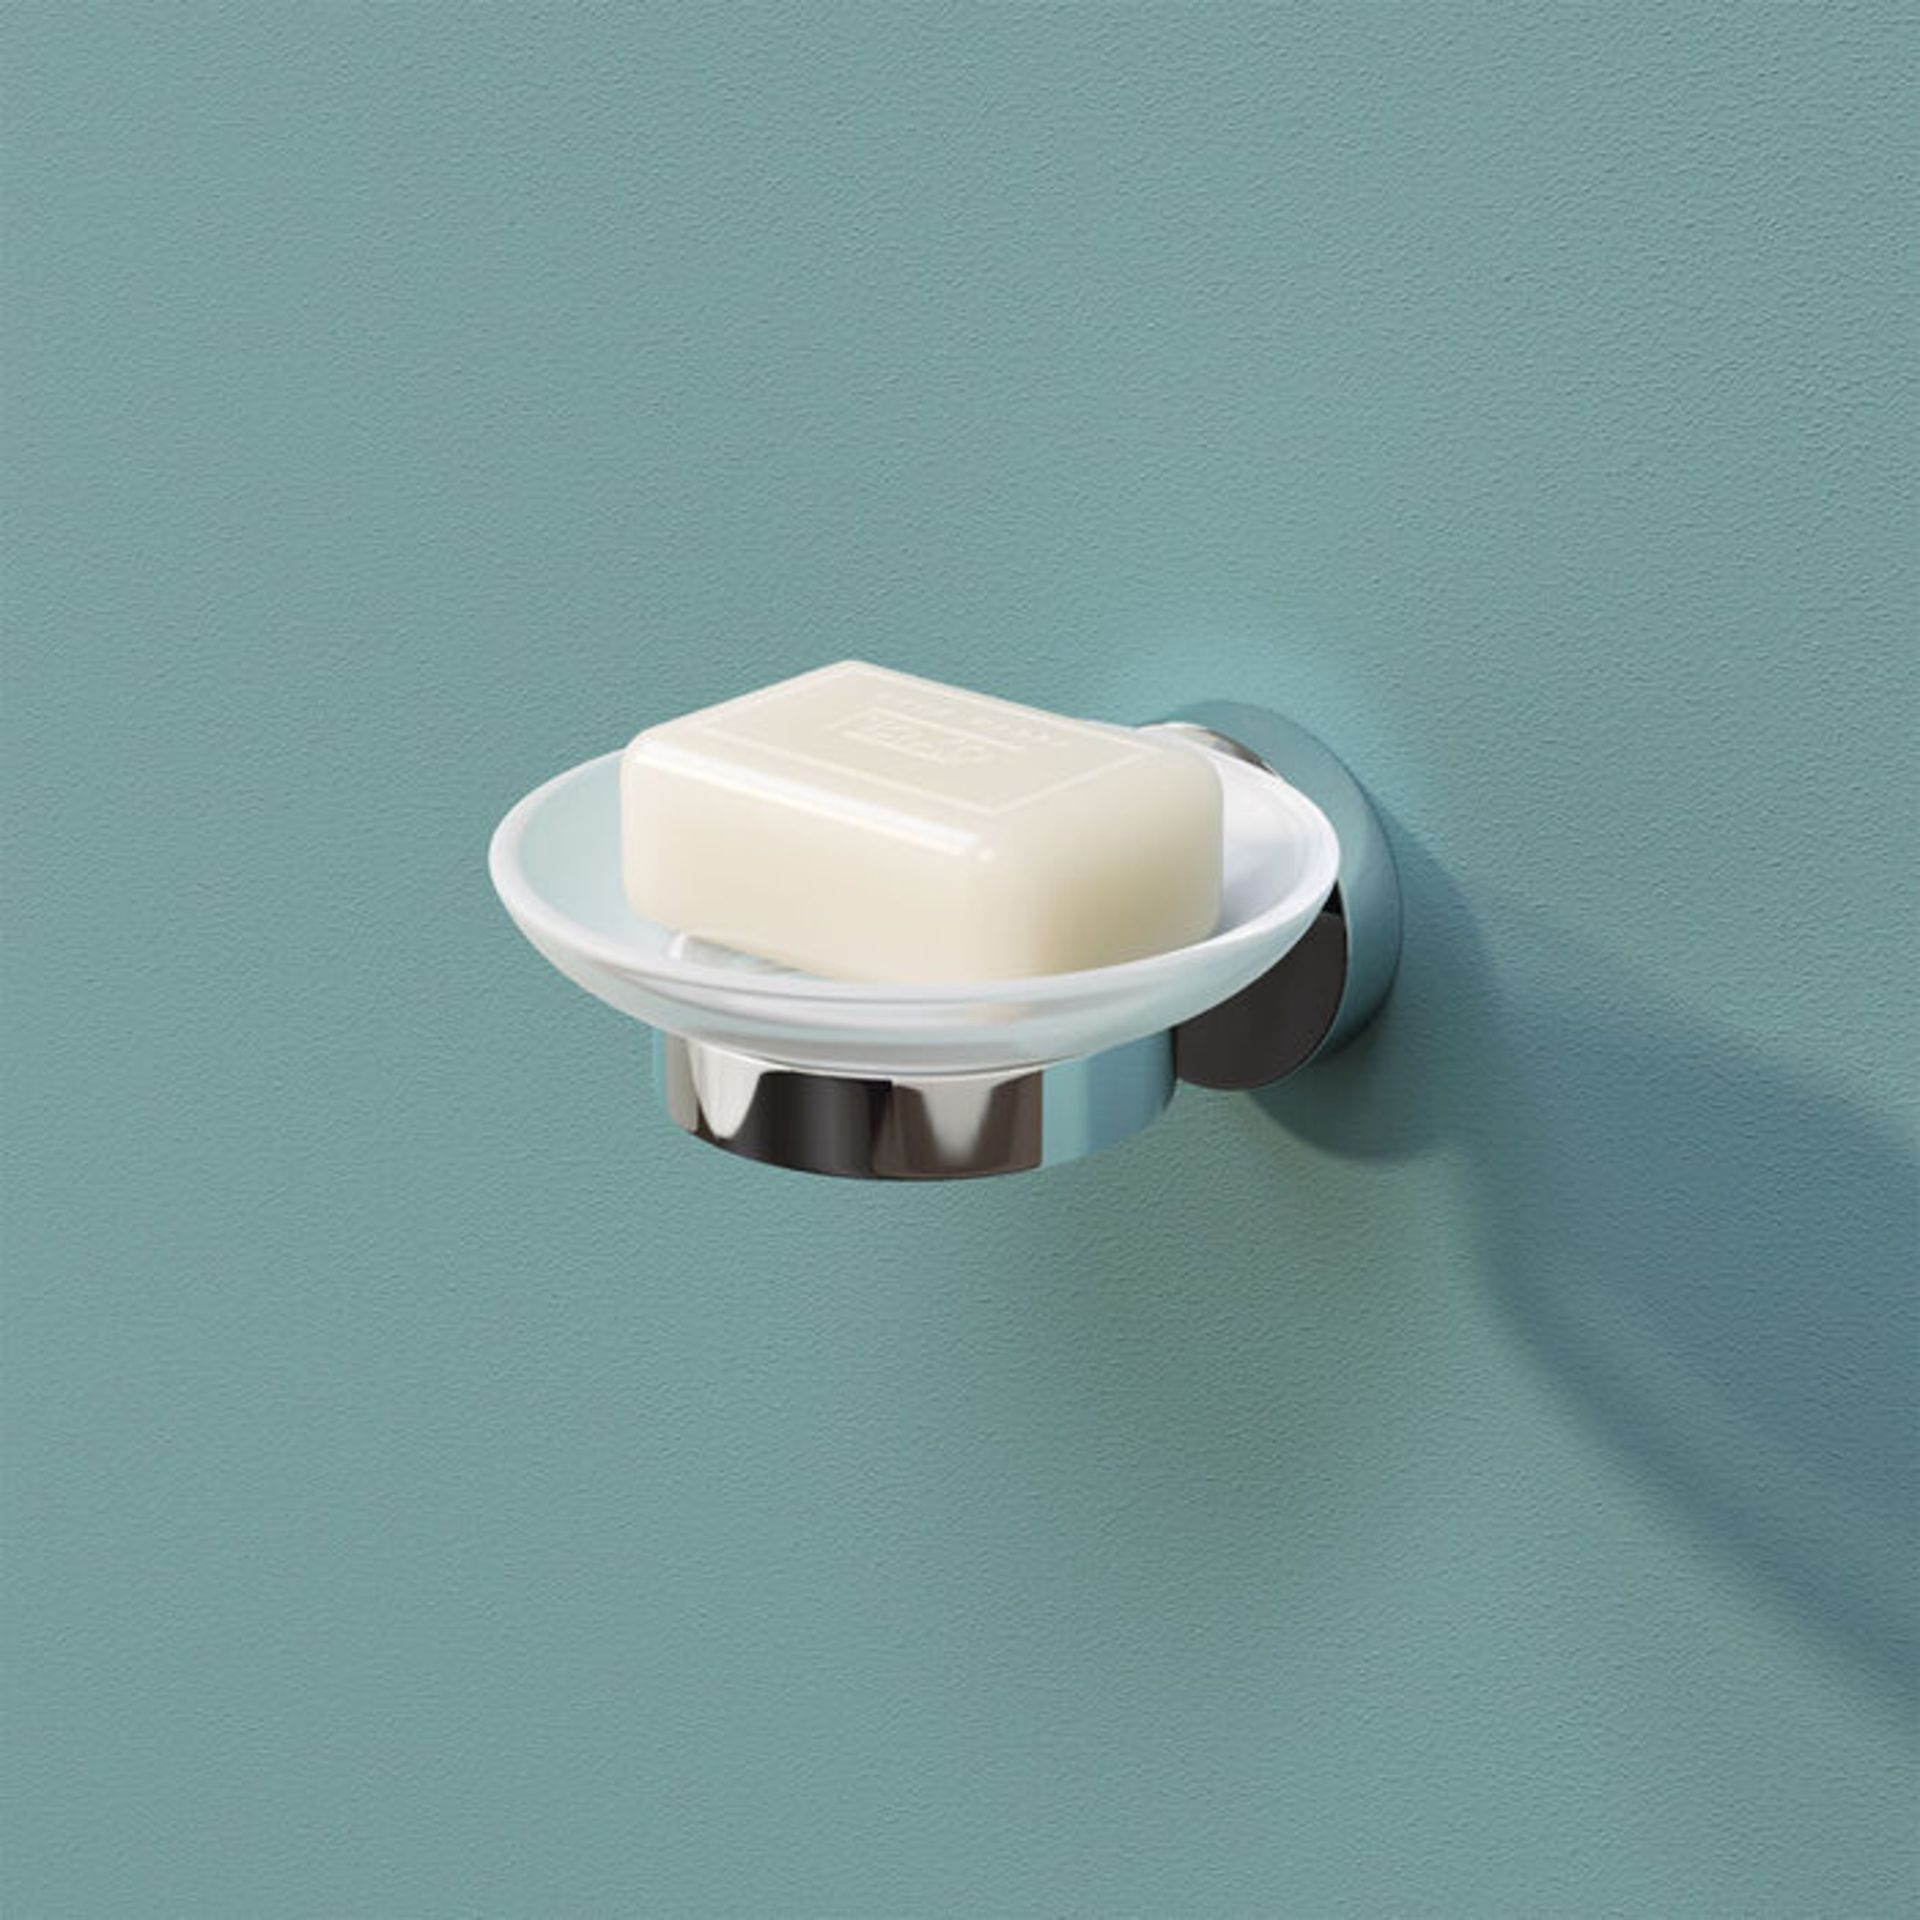 (AA1006) Finsbury Wall Mounted Soap Dish. Completes your bathroom with a little extra function...